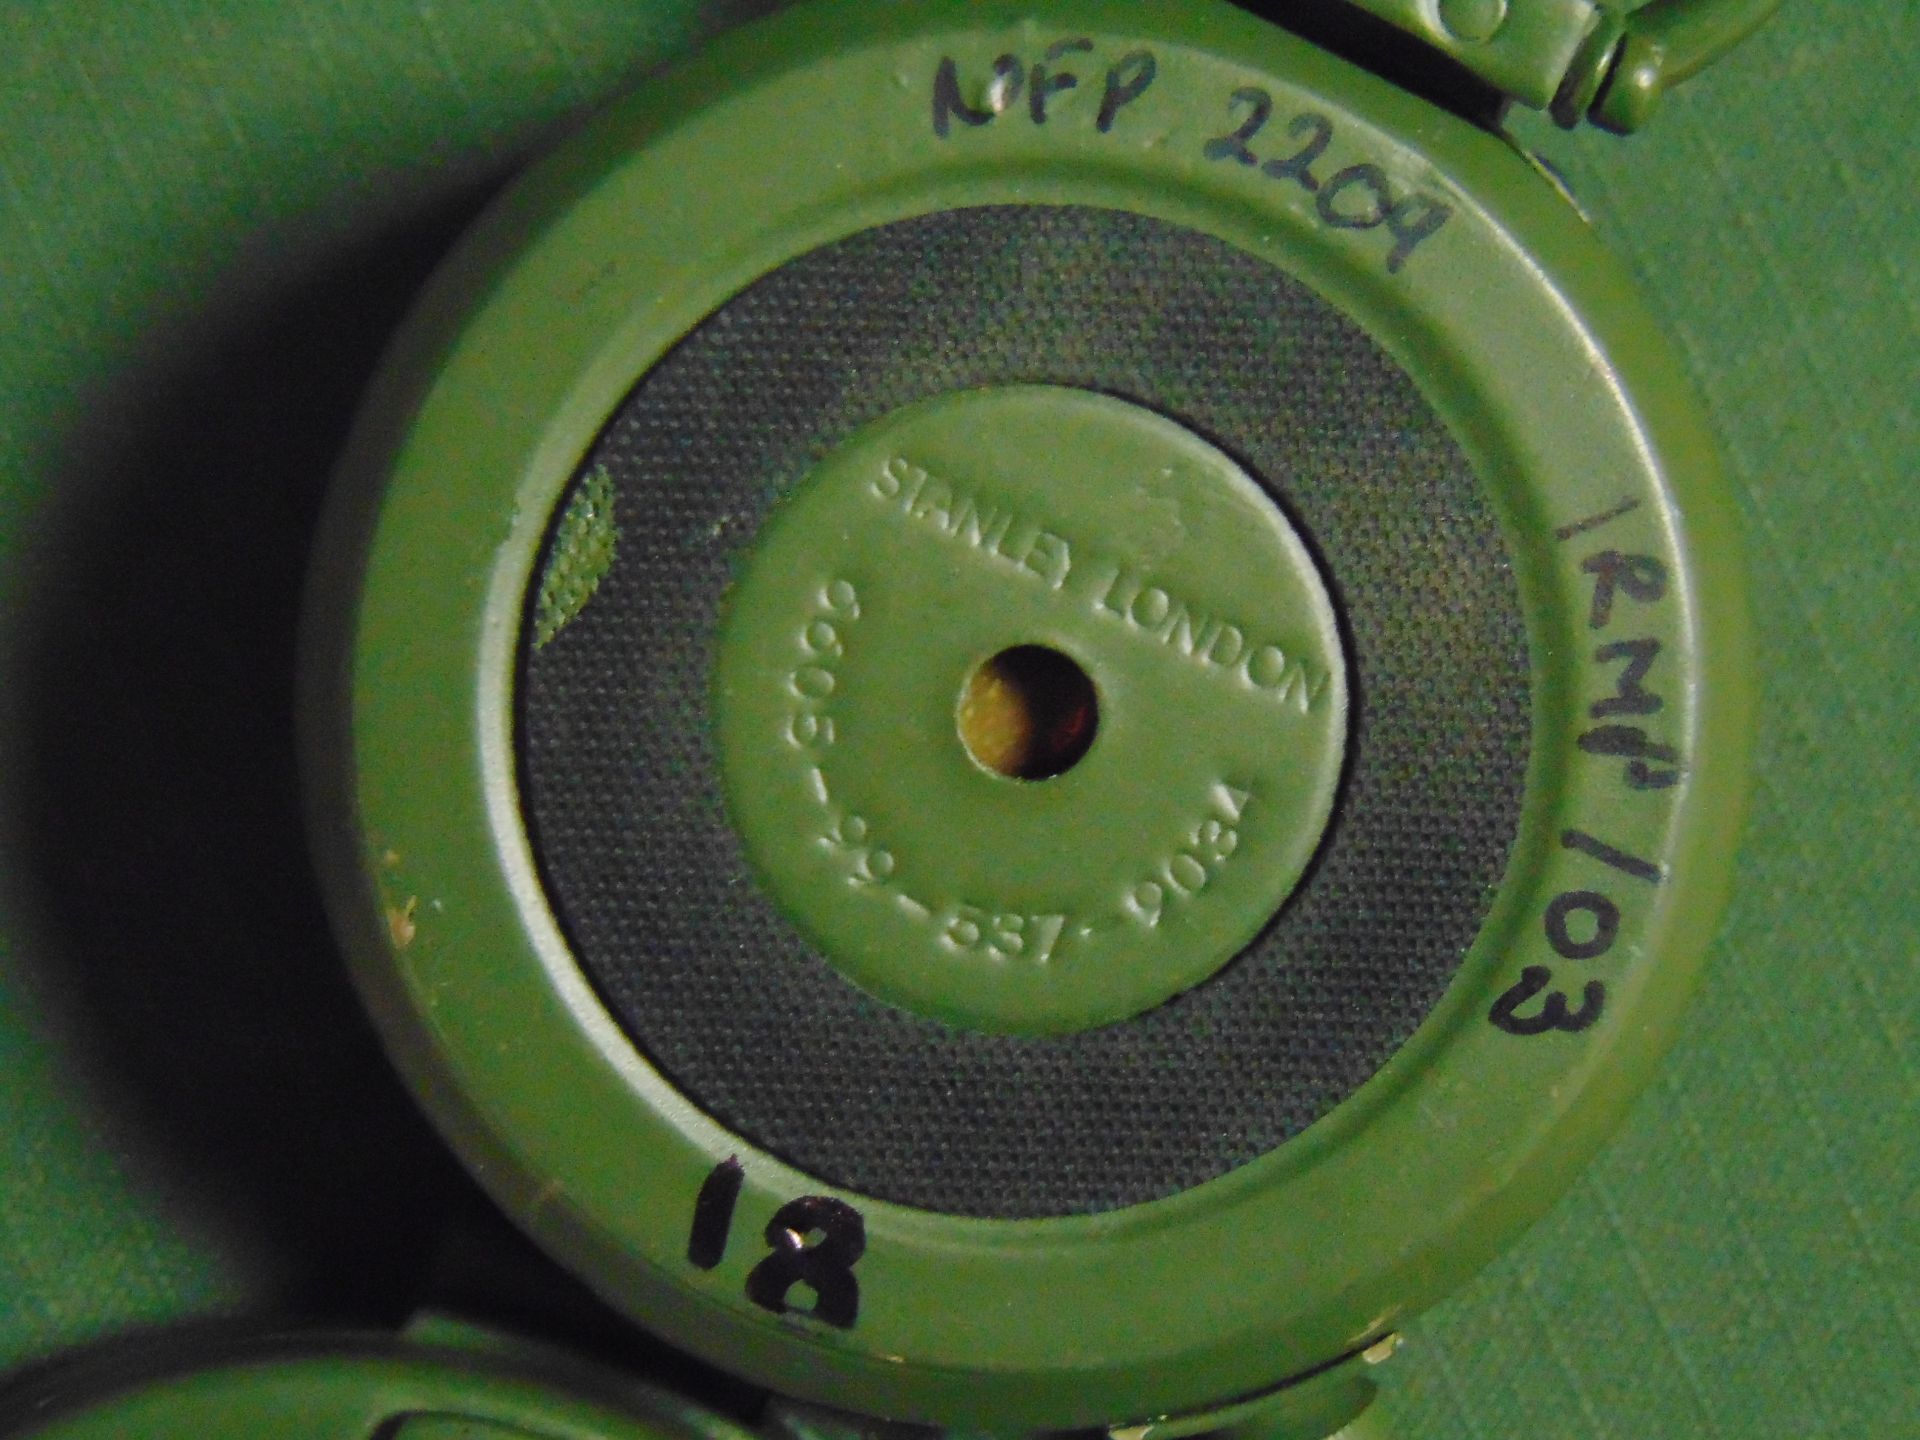 Unissued Stanley Prismatic Marching Compass - Image 5 of 5